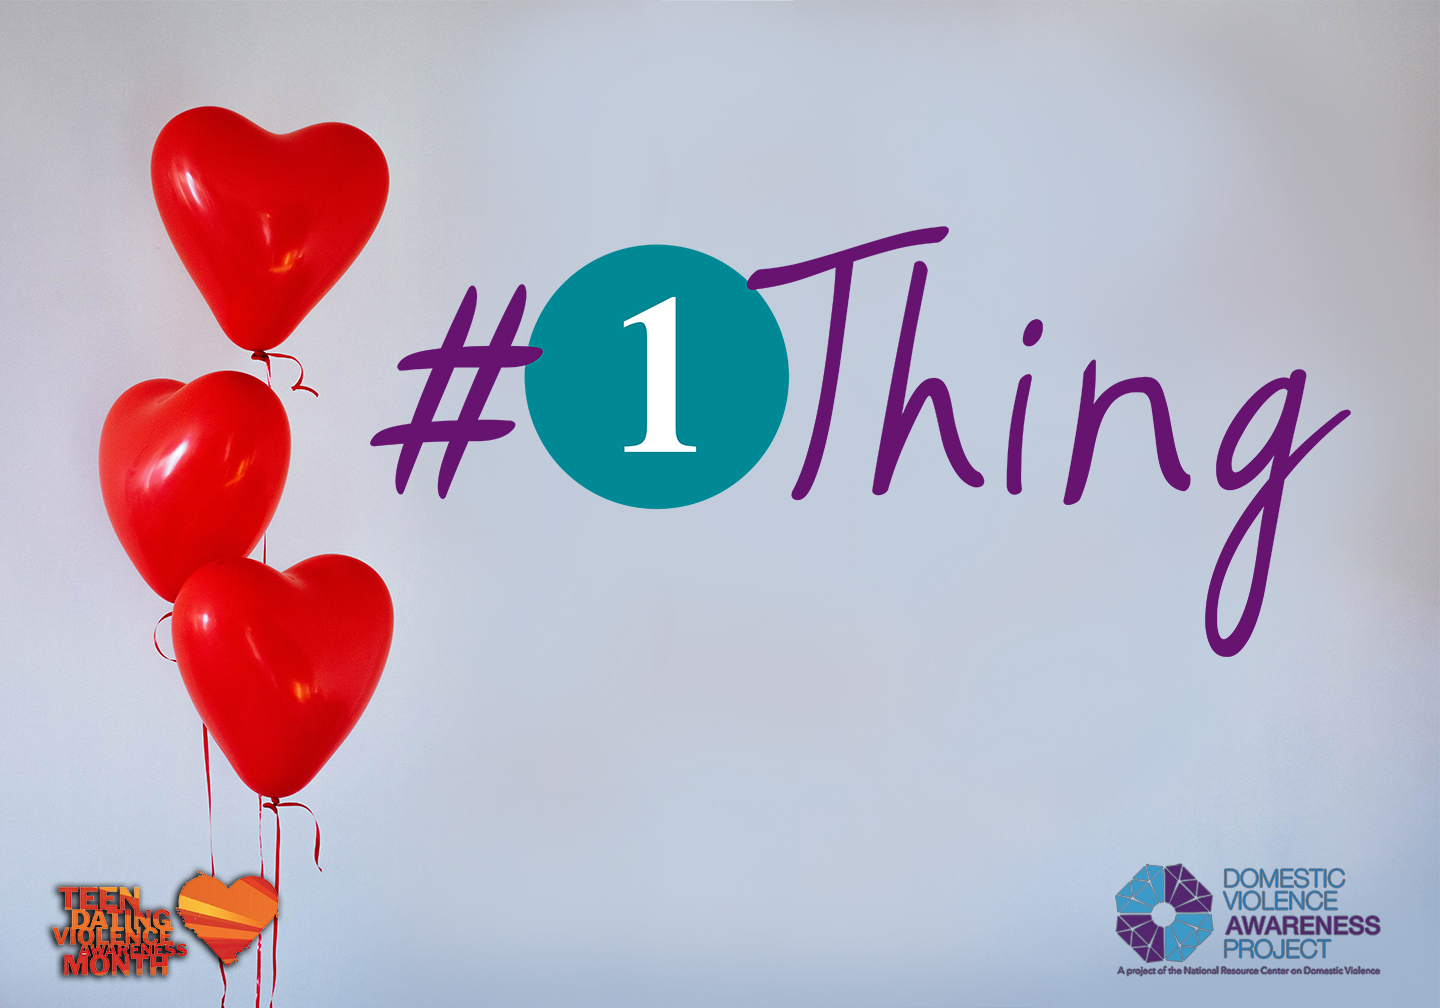 #1Thing logo imposed over image of red heart balloons